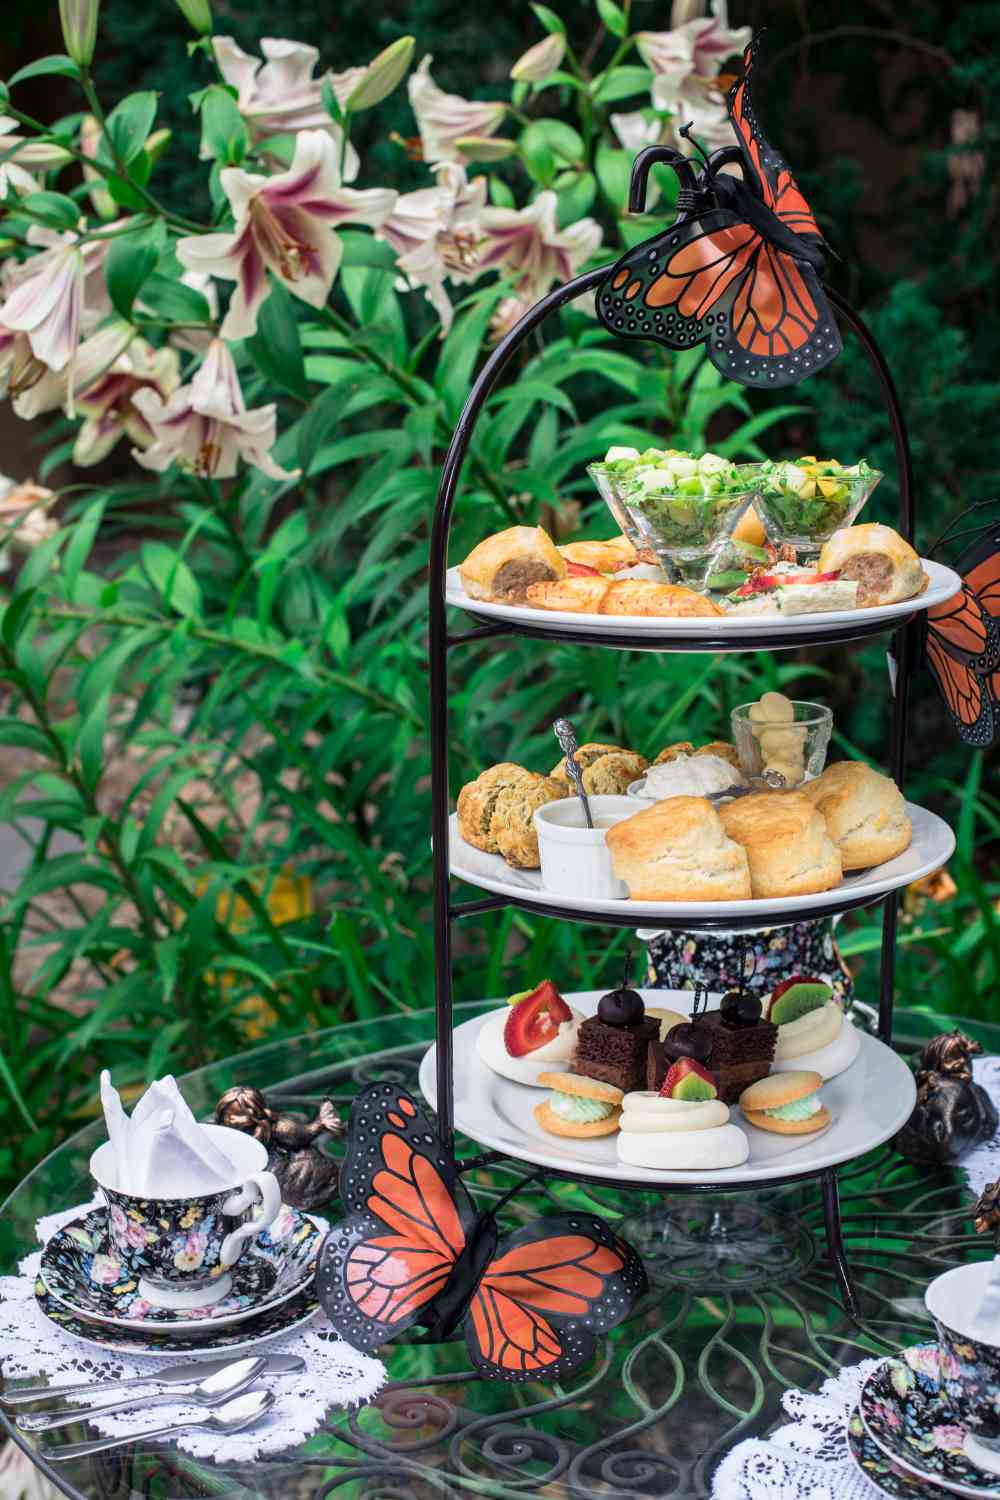 Afternoon Tea Menu - A Neverland Adventure - Dine in Tray for 3